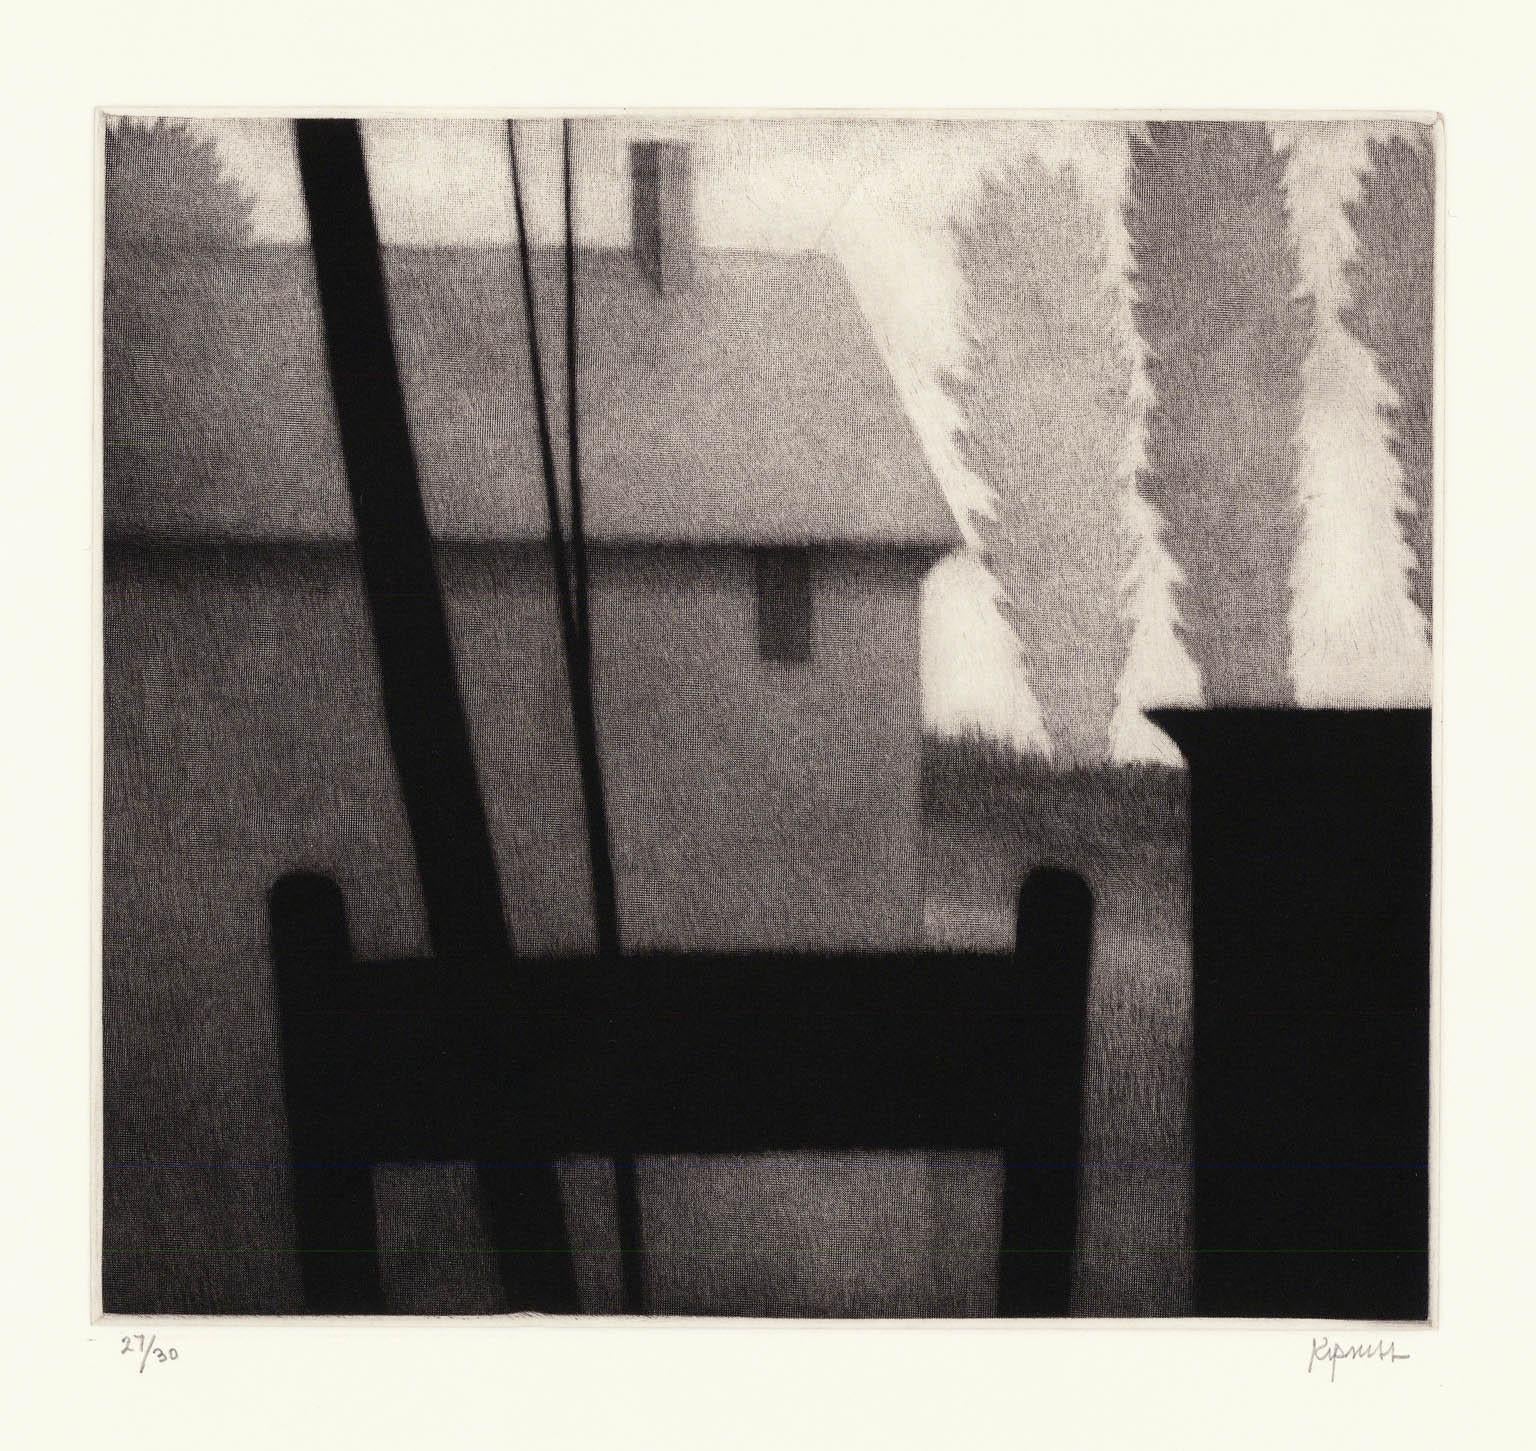 “Chair & rooftop” is a mezzotint engraving created by Robert Kipniss in 2015.  Printed in an edition of 30 this impression is signed in pencil and inscribed 